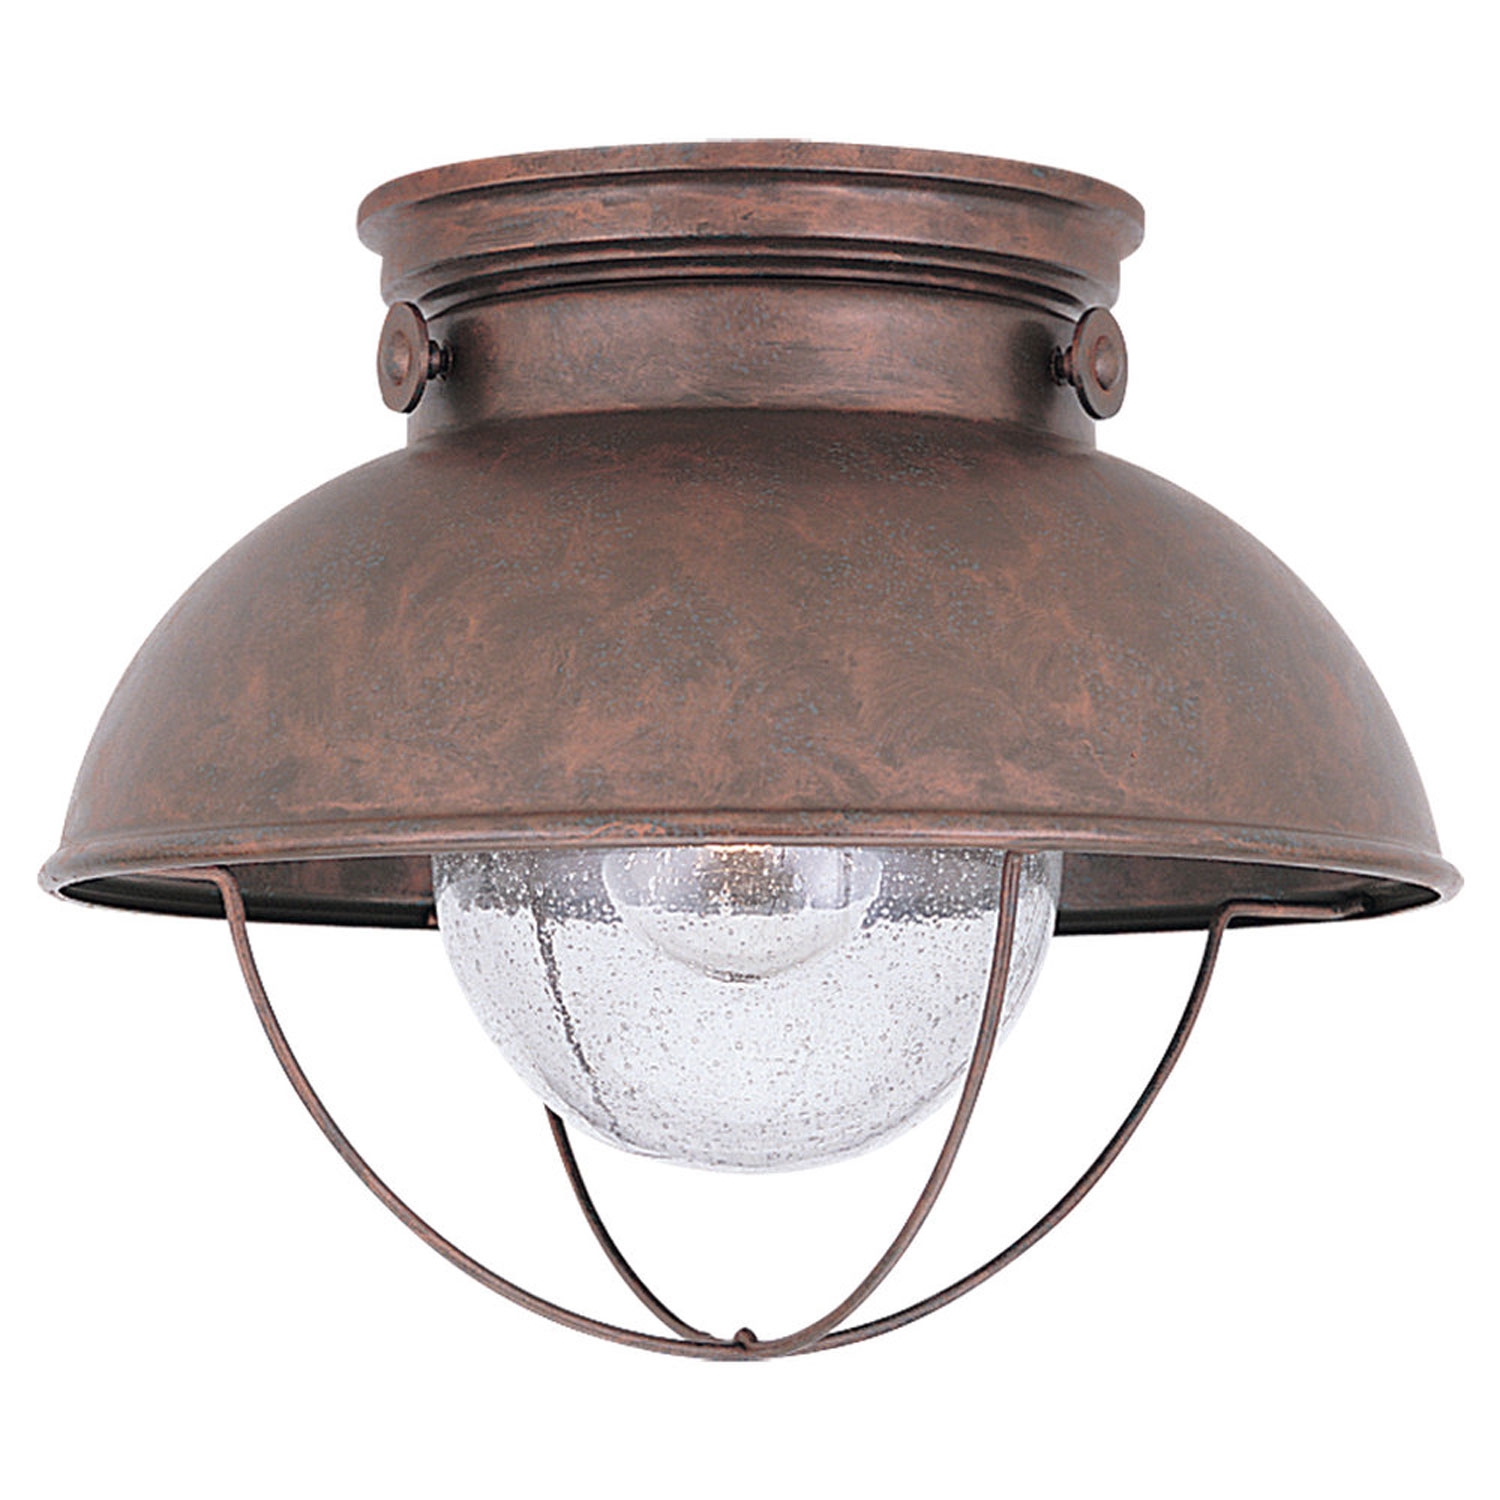 Ceiling Mount Porch Light With Photocell